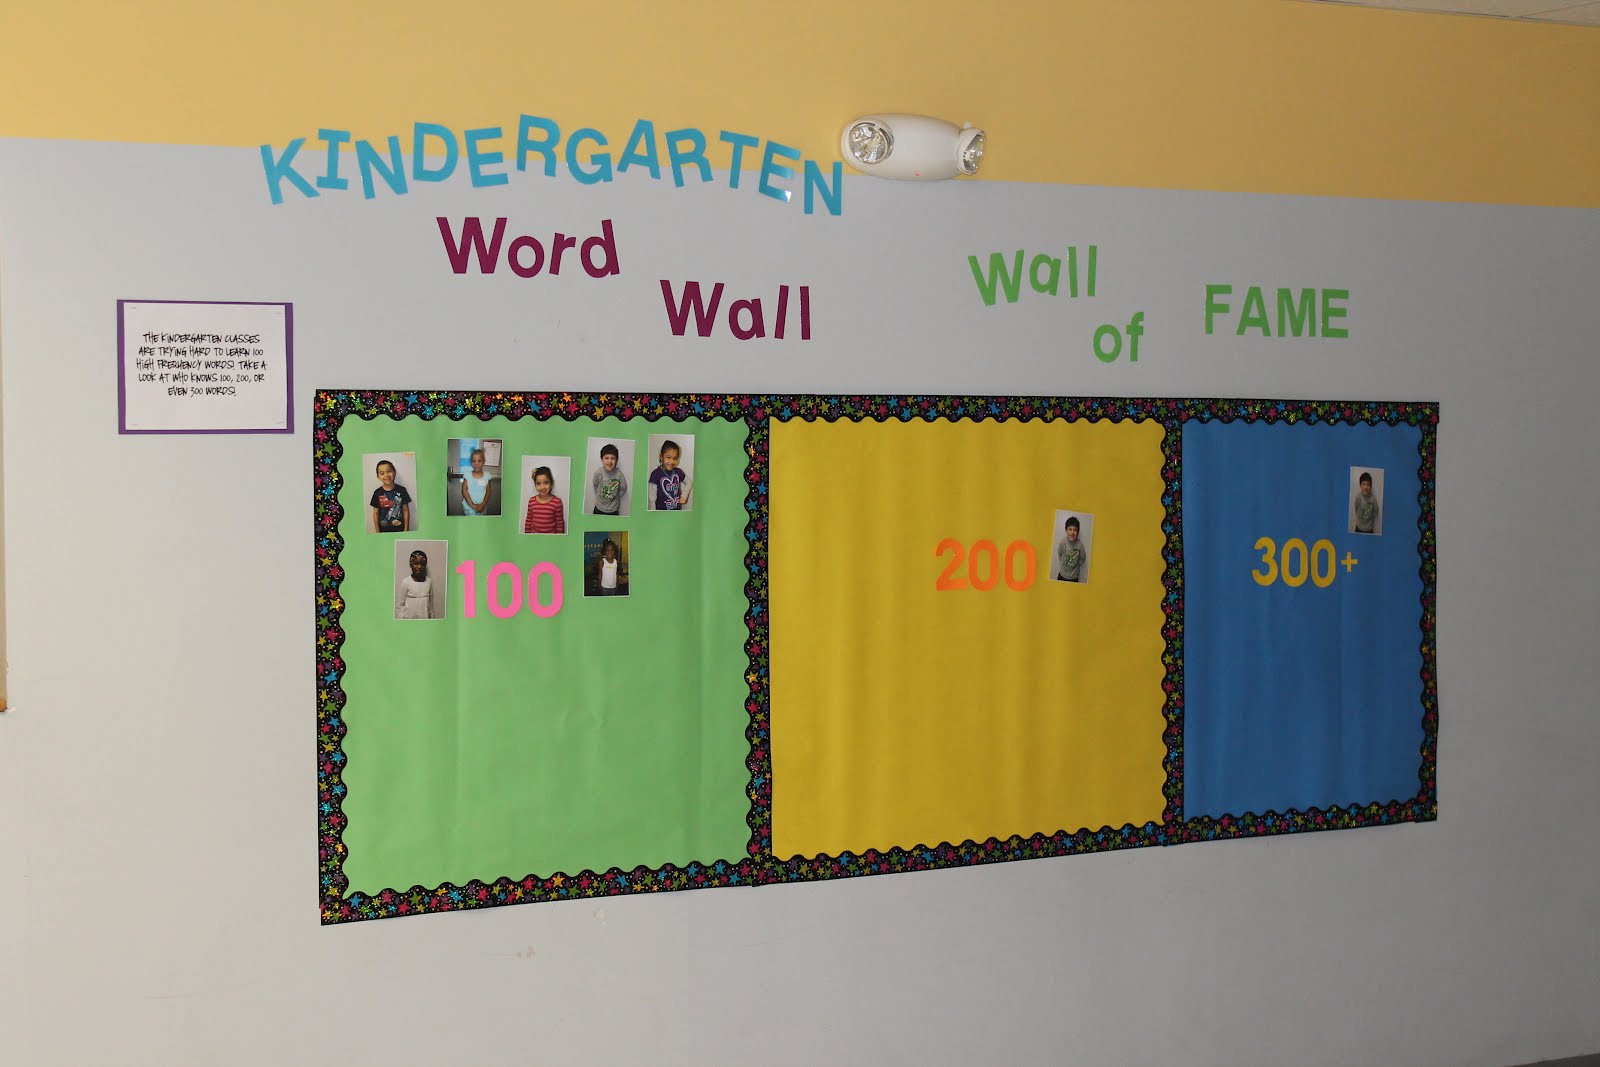 Https wordwall net was were. Word Wall. Wall of Fame. Wordwall 7. Wall of Fame in English class.